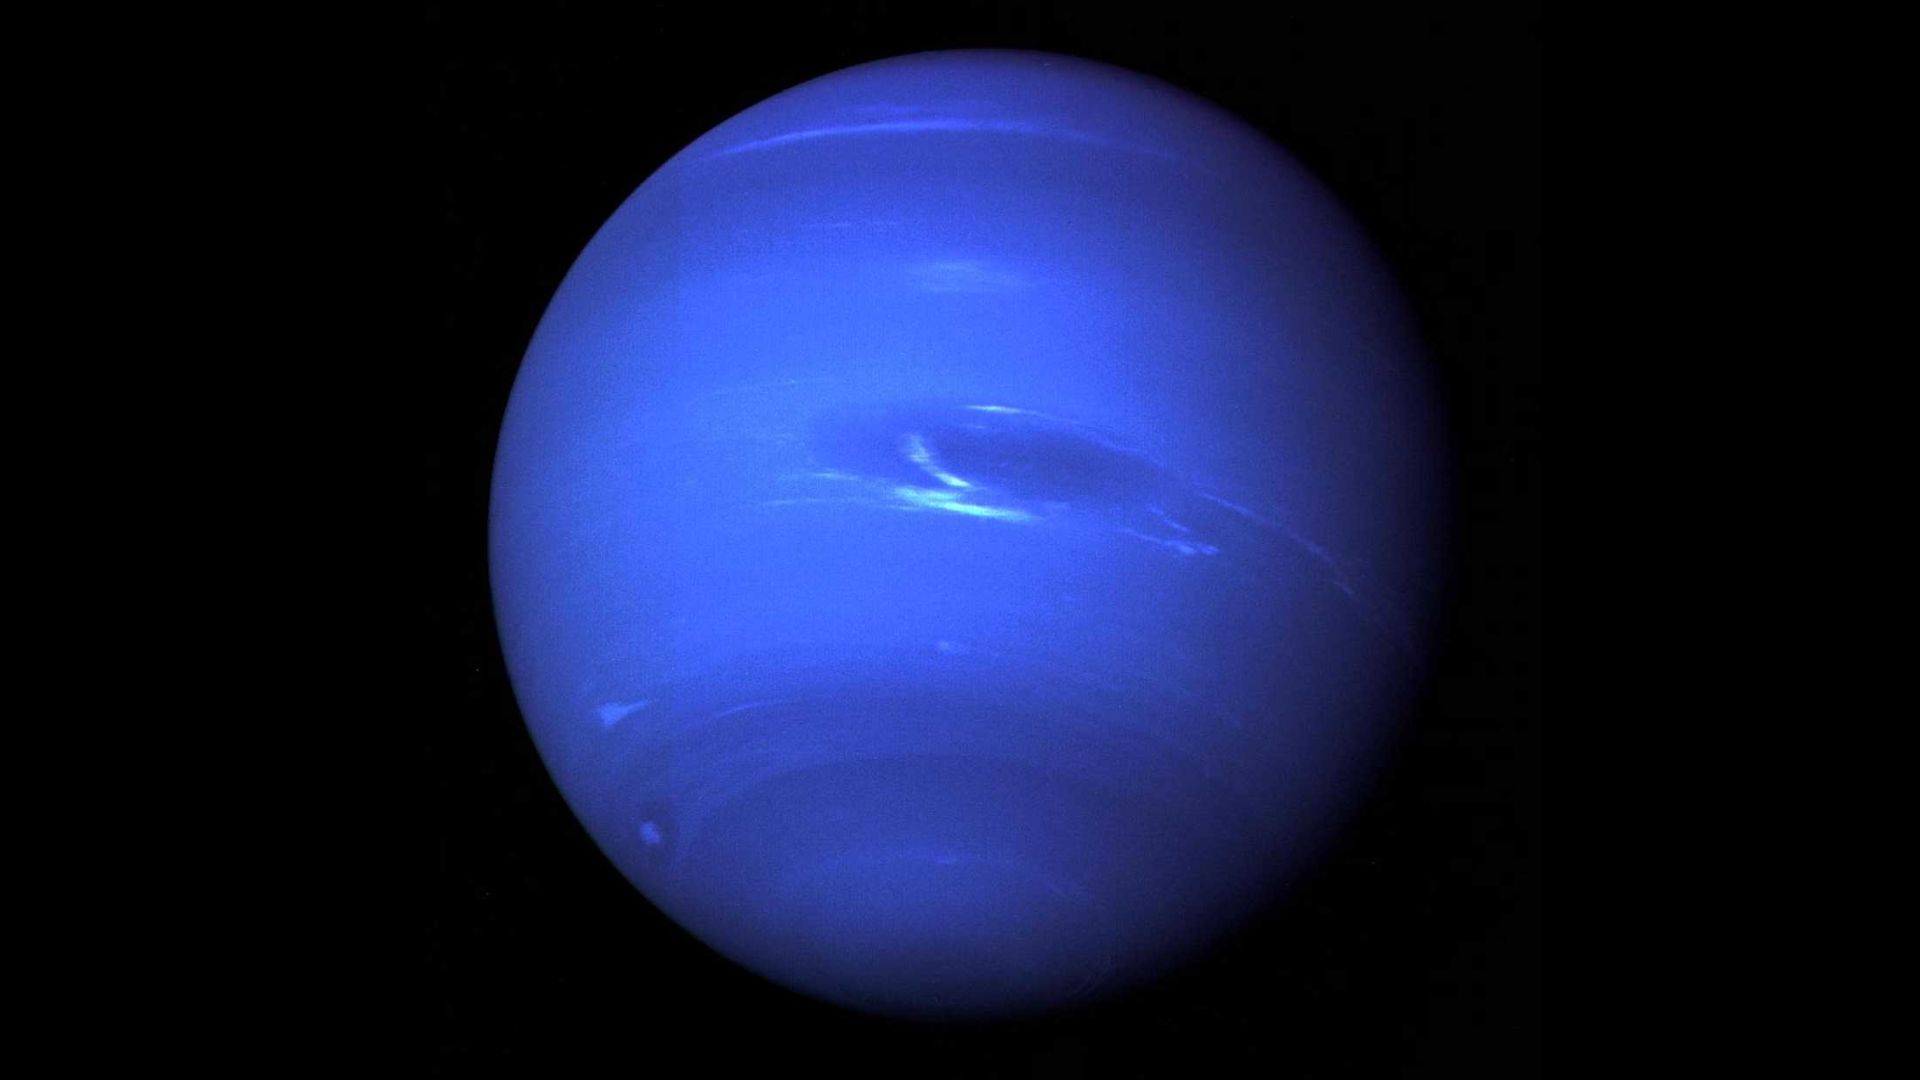 The planet Neptune from the perspective of Voyager 2